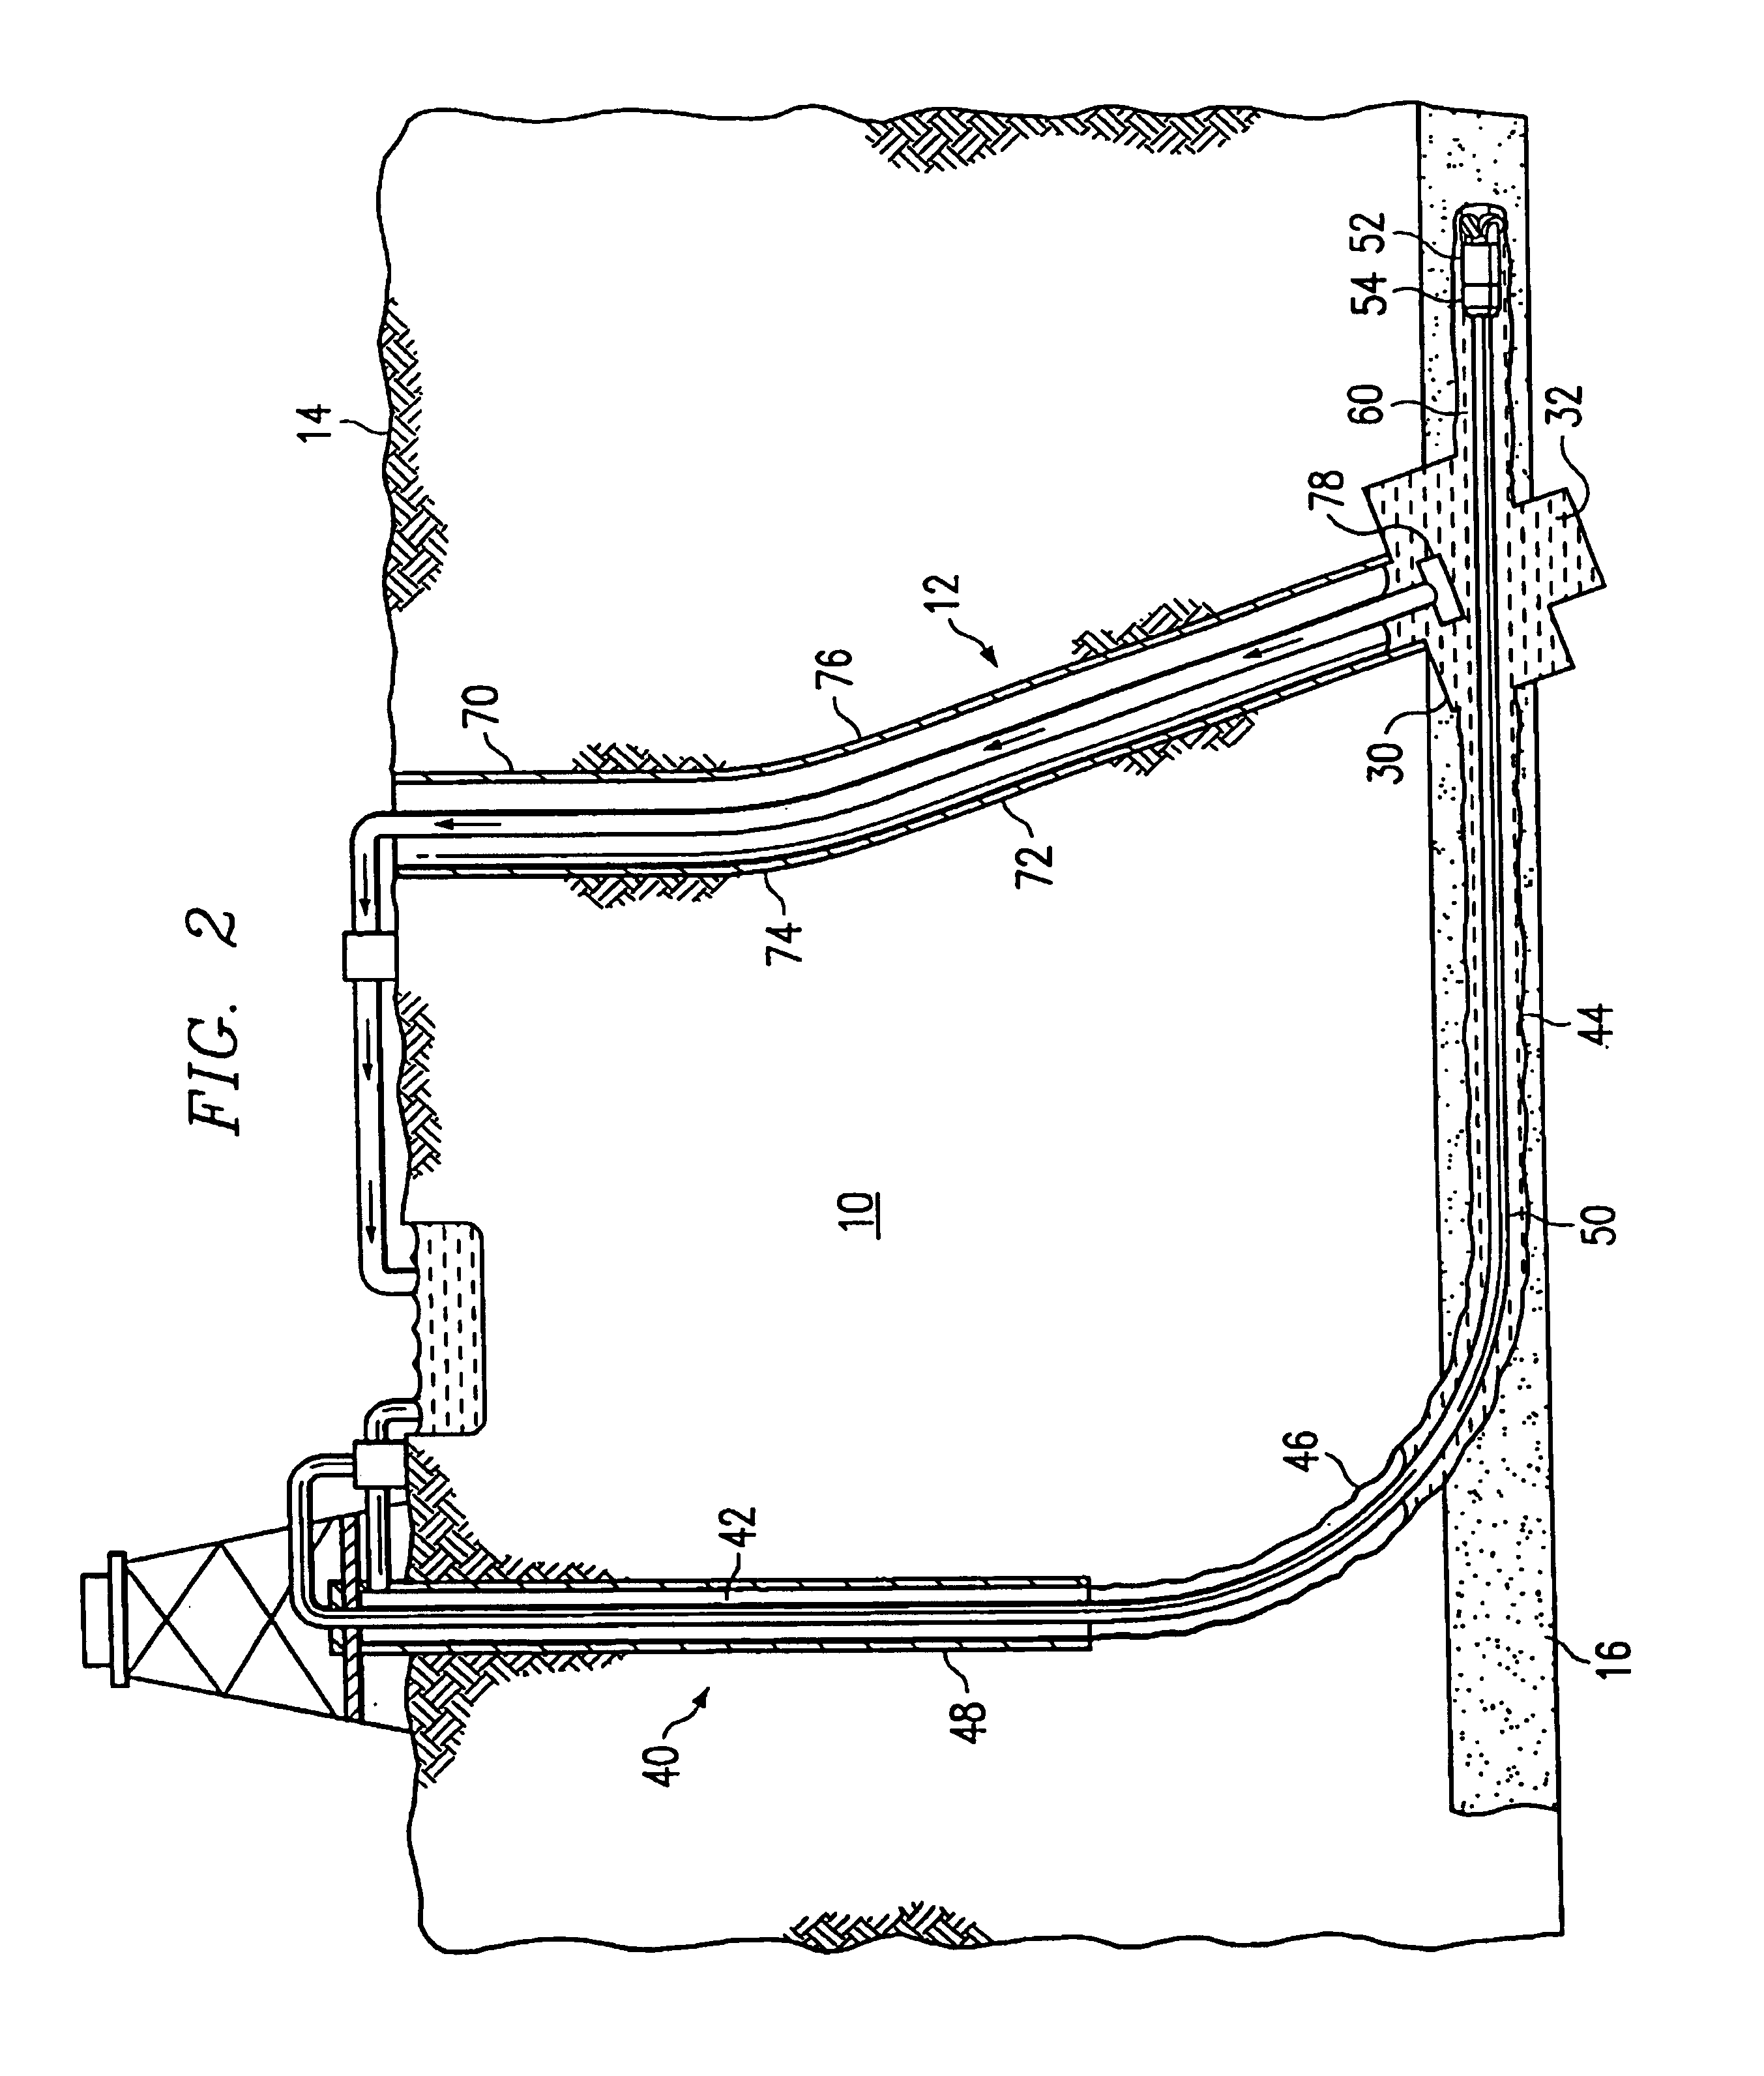 Method and system for accessing a subterranean zone from a limited surface area